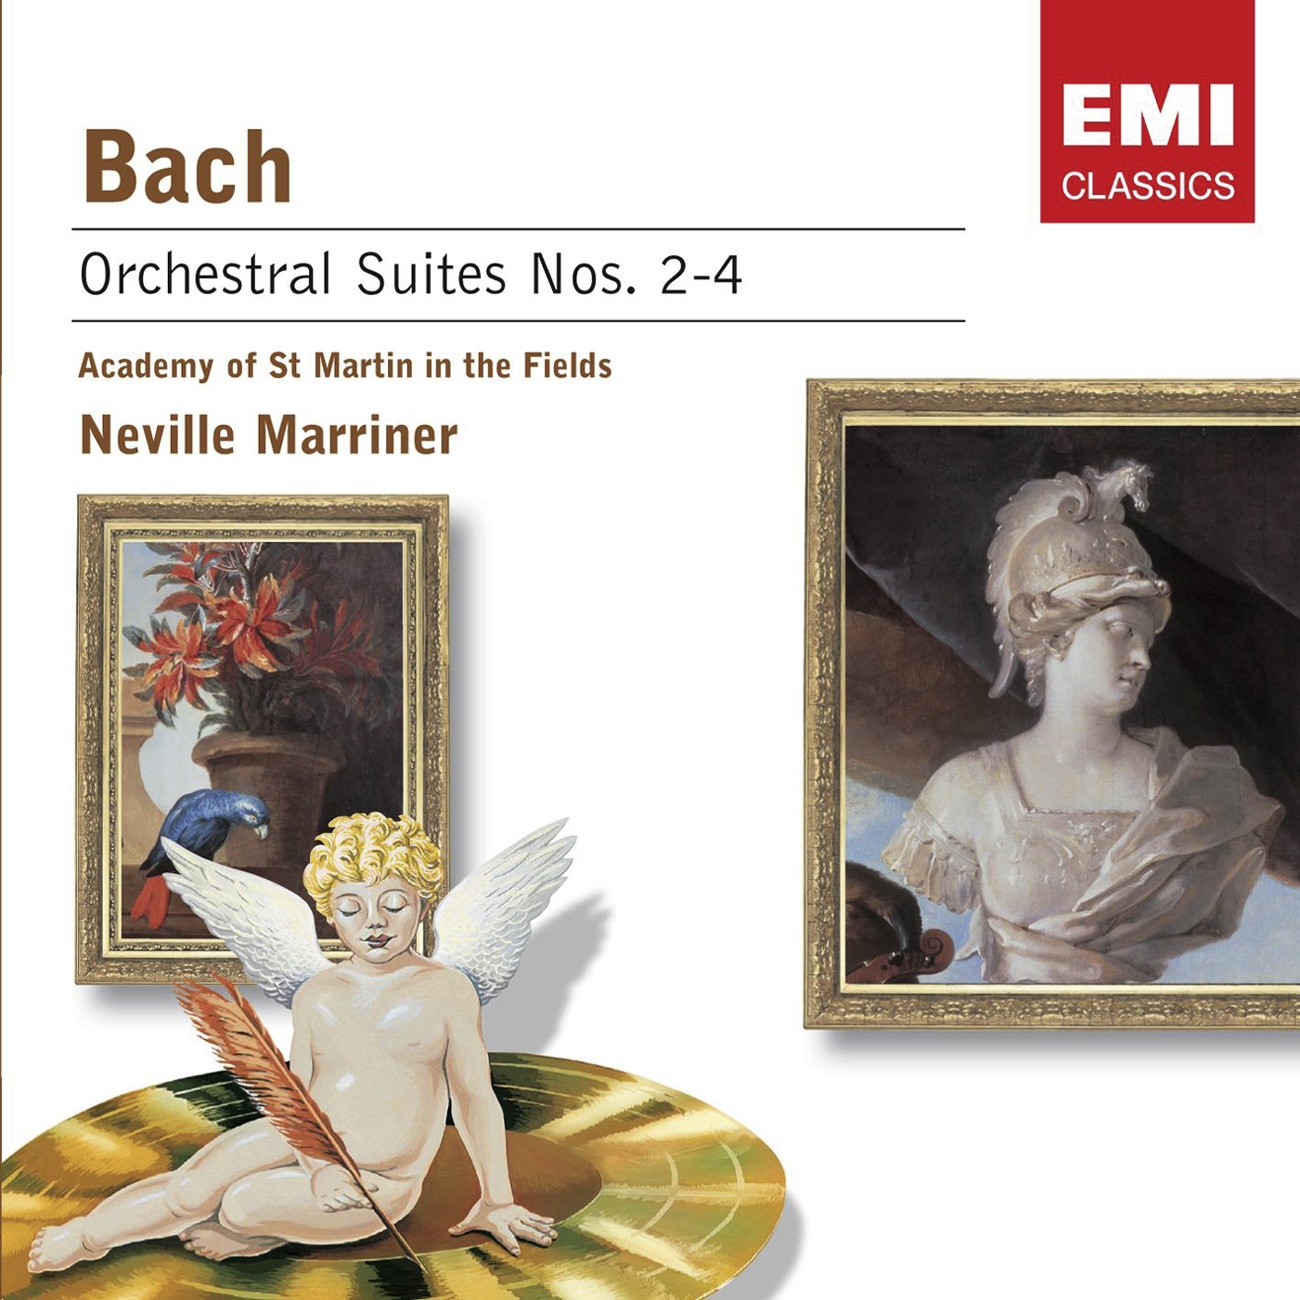 4 Orchestral Suites, BWV 1066-9, Suite No.2 in B Minor, BWV 1067 (flute and strings): Ouverture